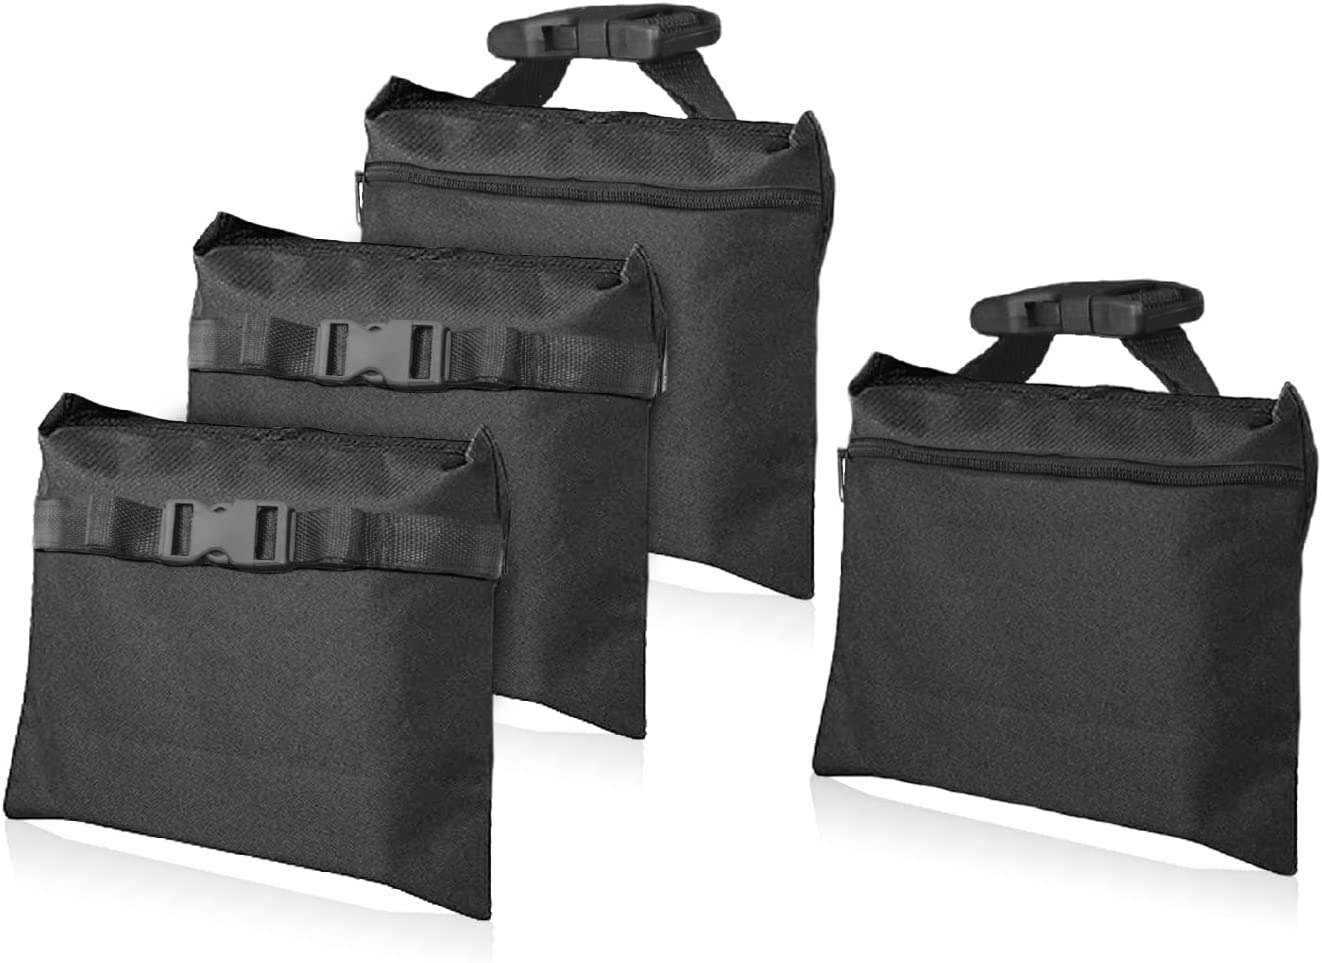 Sandbags 4 Packs with Four PE Bags, Heavy Duty Sand Bags, Sand Bags for Weight w